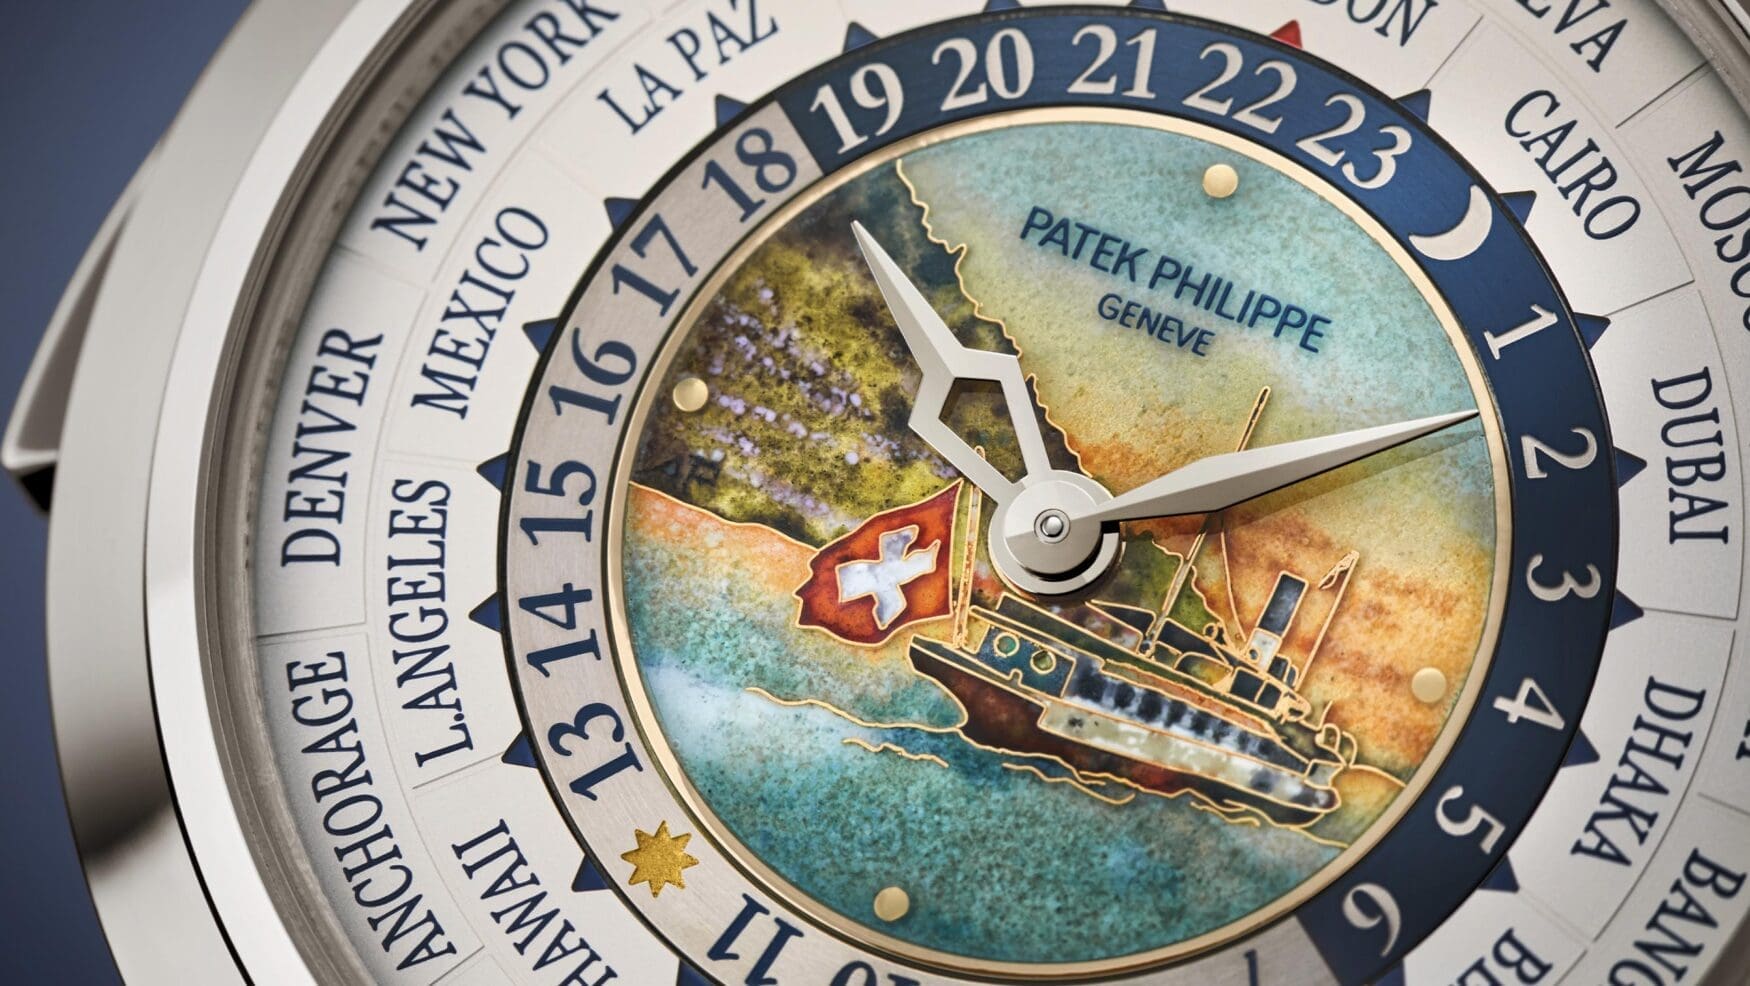 Cloisonné mastery of the Patek Philippe 5531G Grand Complications